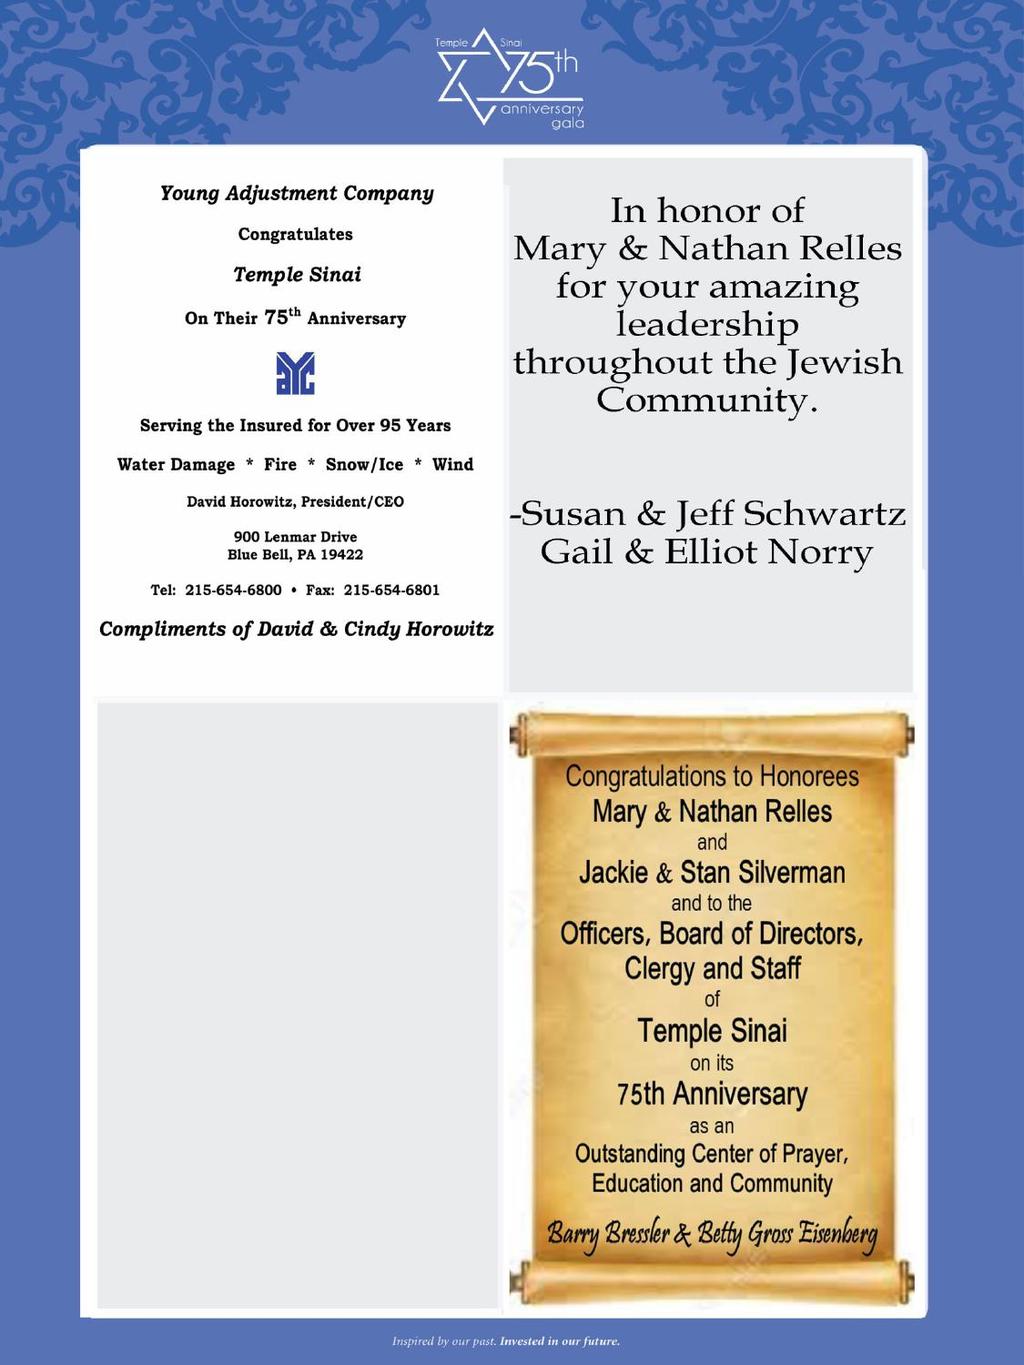 Mazel tov to the Relleses and the Silvermans on this well-deserved honor.